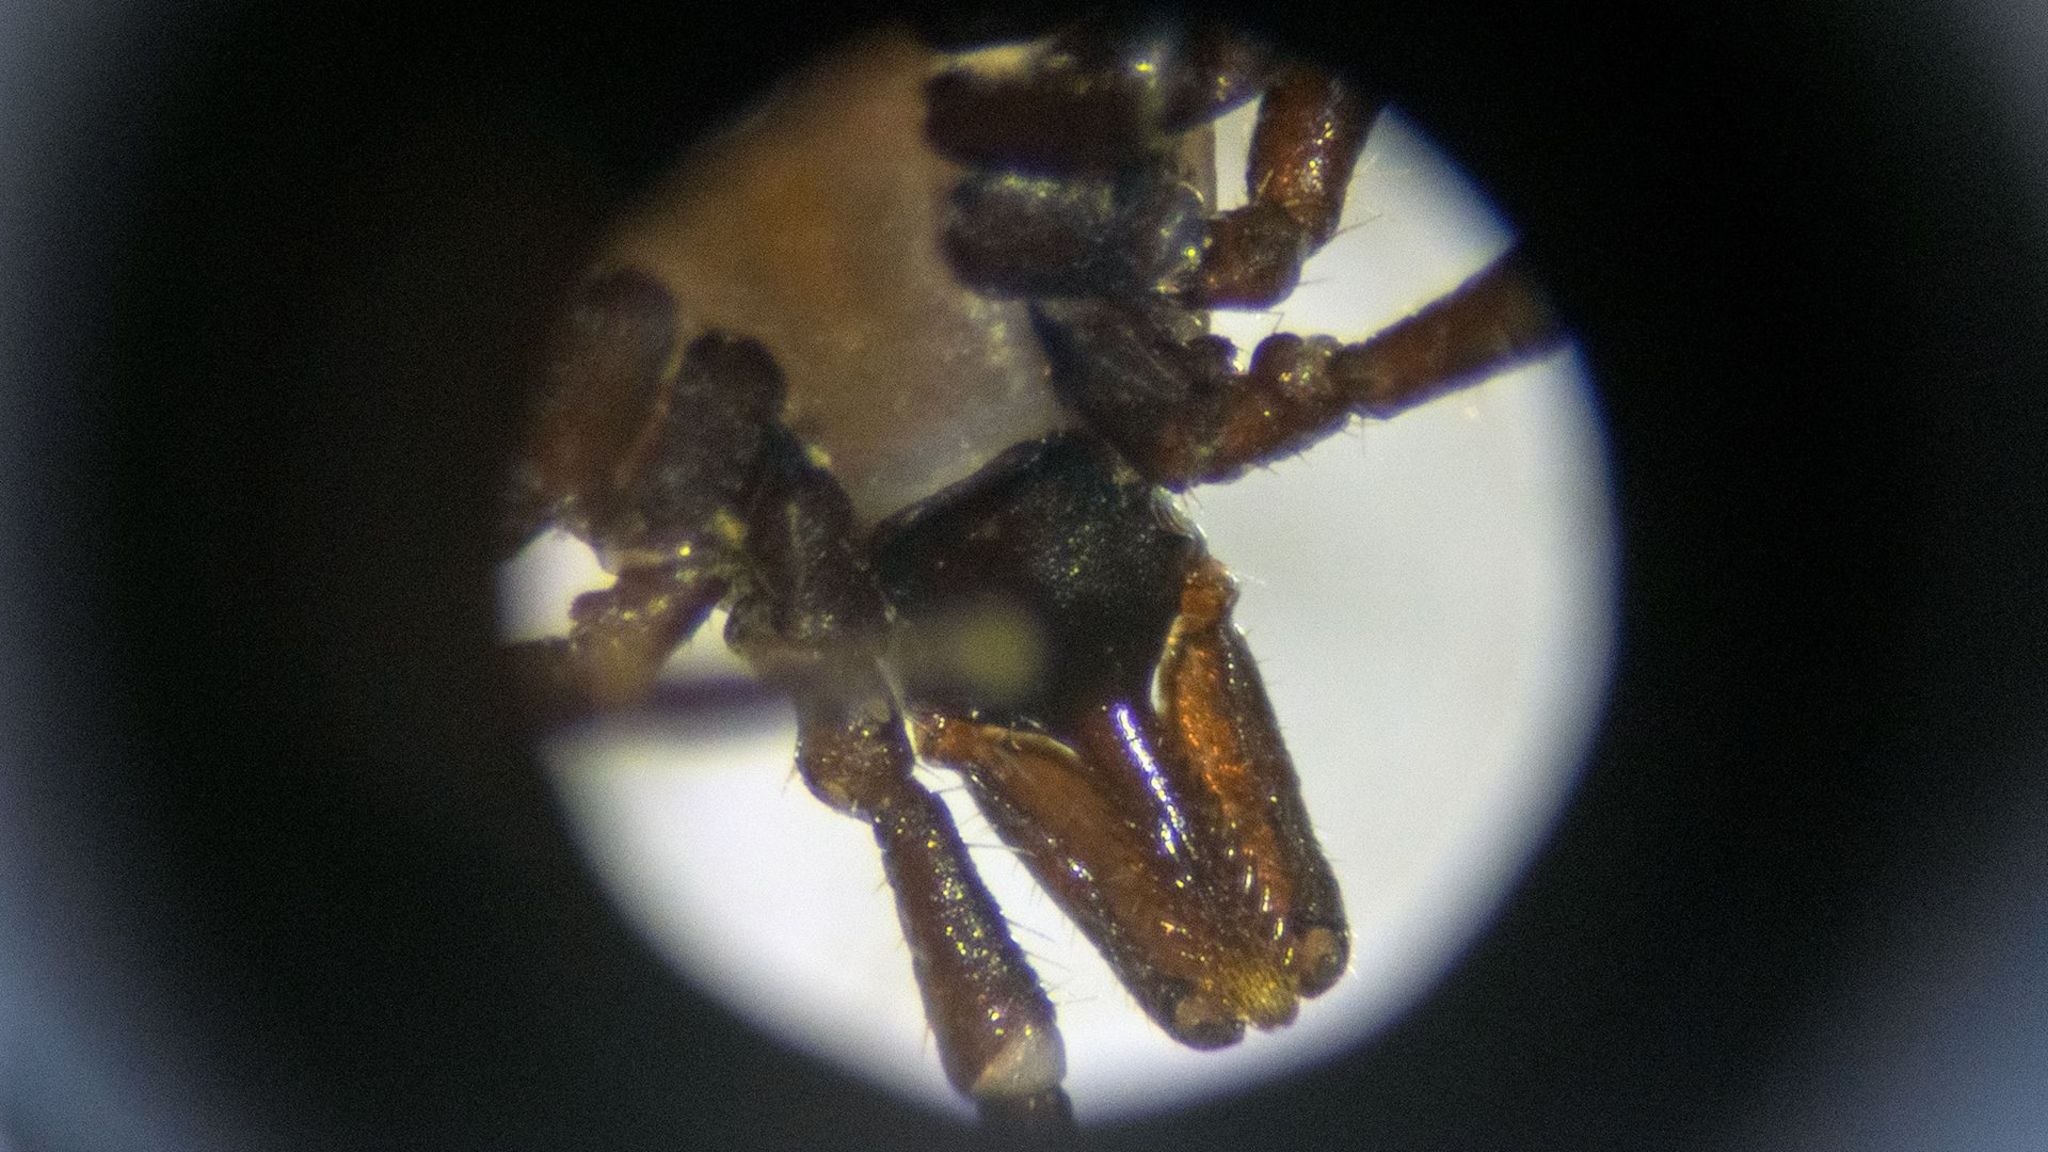 View of tick's mouth as seen through a microscope